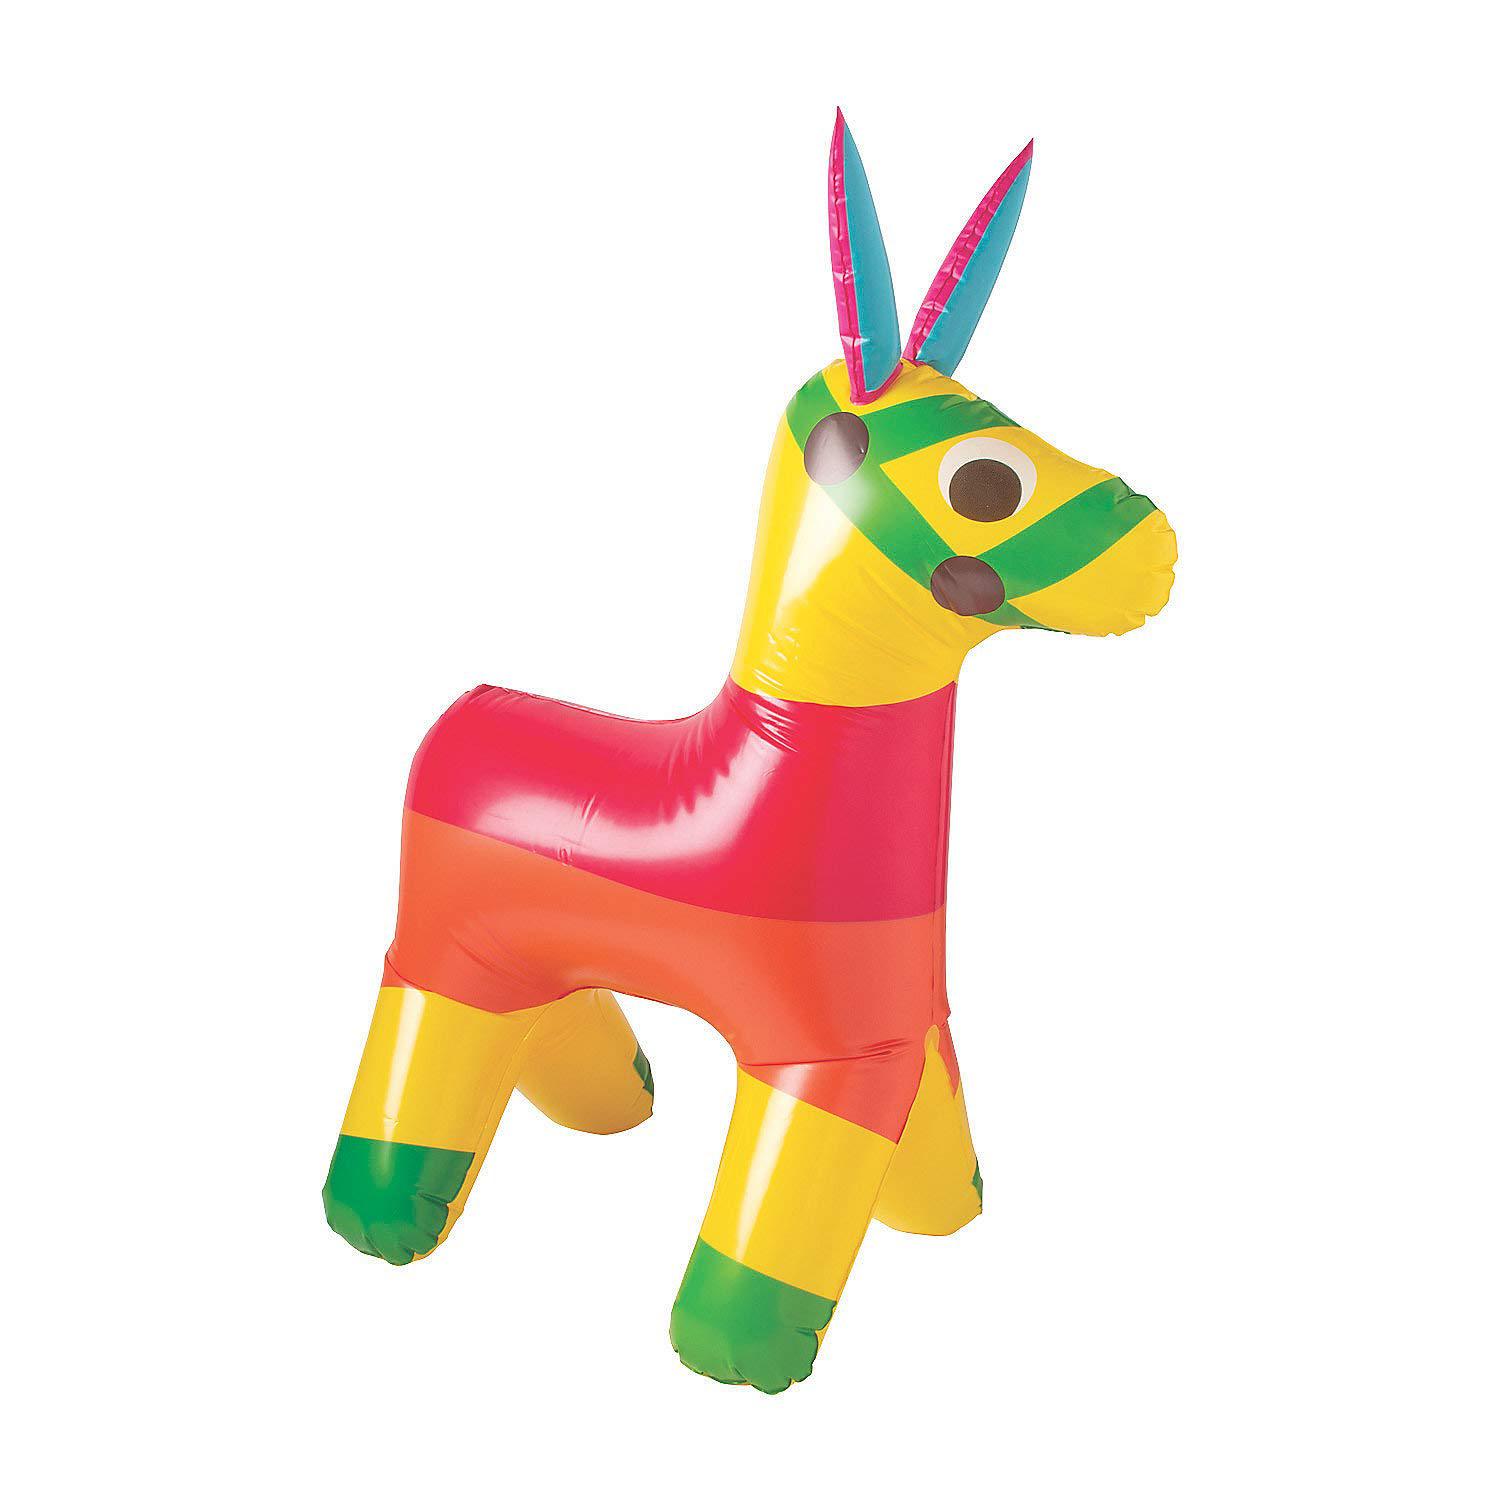 fun express - fiesta giant inflate pinata for cinco de mayo - toys - inflates - inflatable characters - cinco de mayo - 1 pie